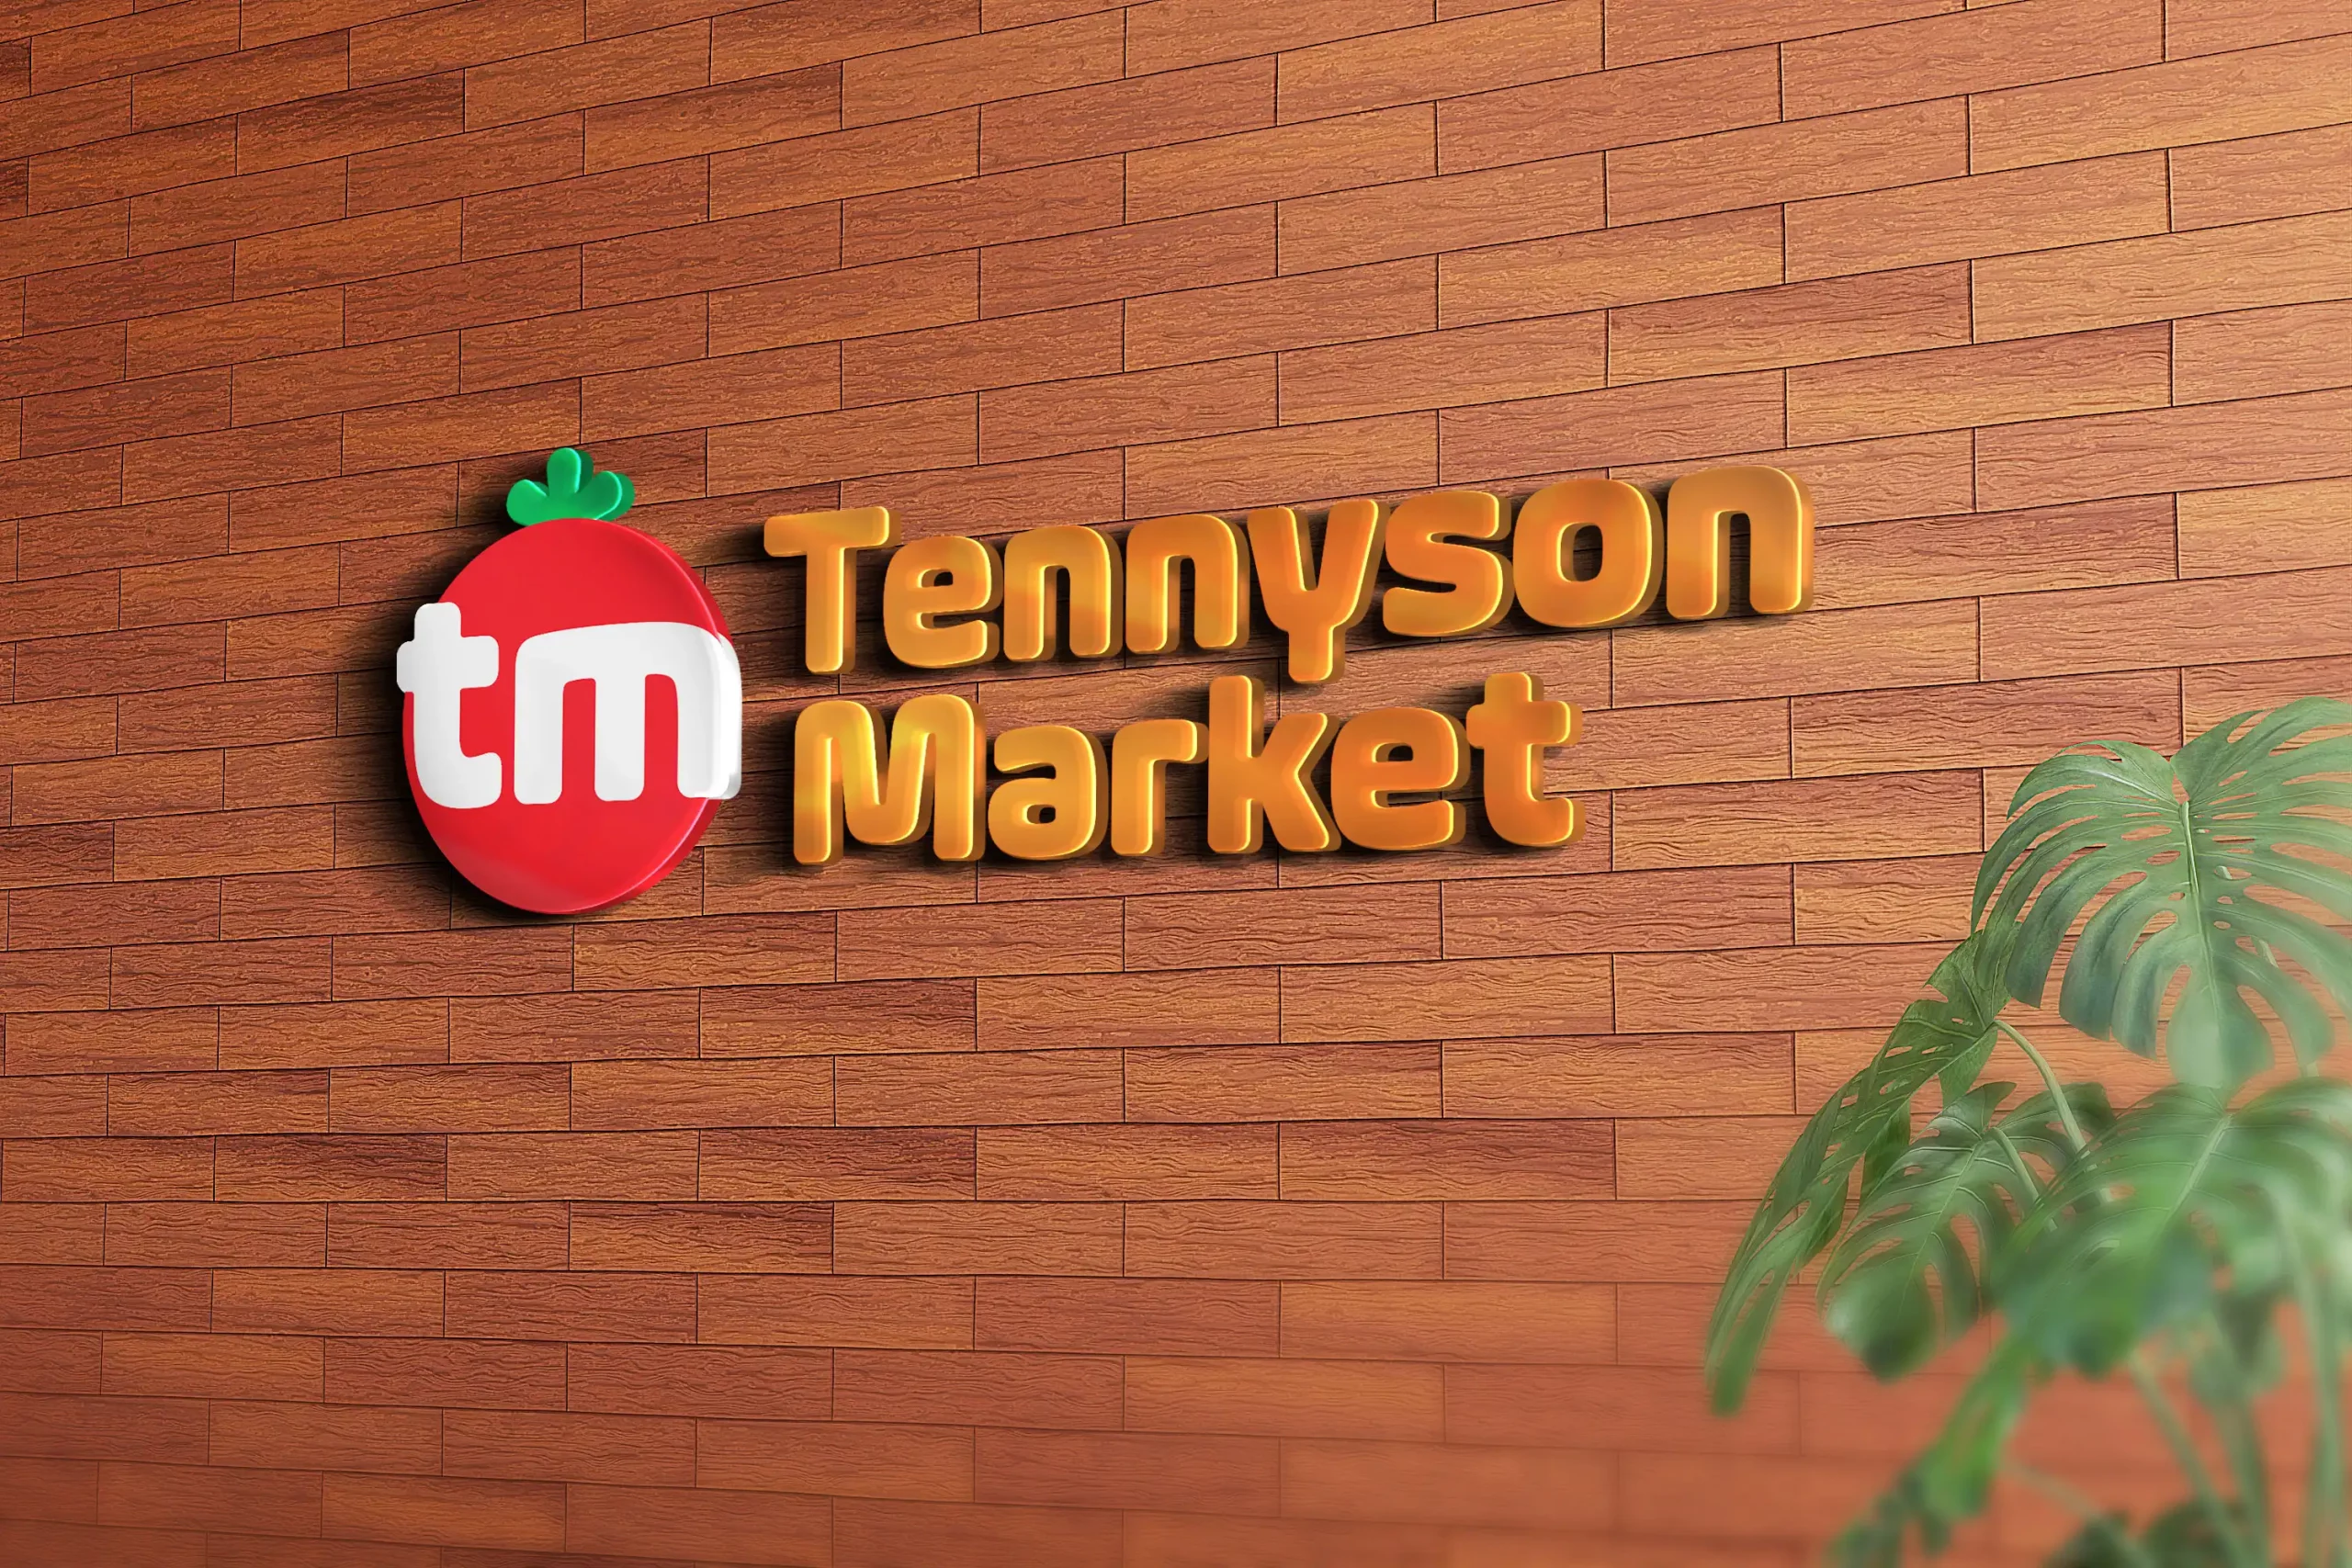 Logo Making made easy for Tennyson Market in Rolleston, Christchurch, Canterbury, NZ. A Super Market Logo Design made by XDC.NZ, the super experienced, professional, specialist Logo Designer Maker based in Christchurch & Rolleston